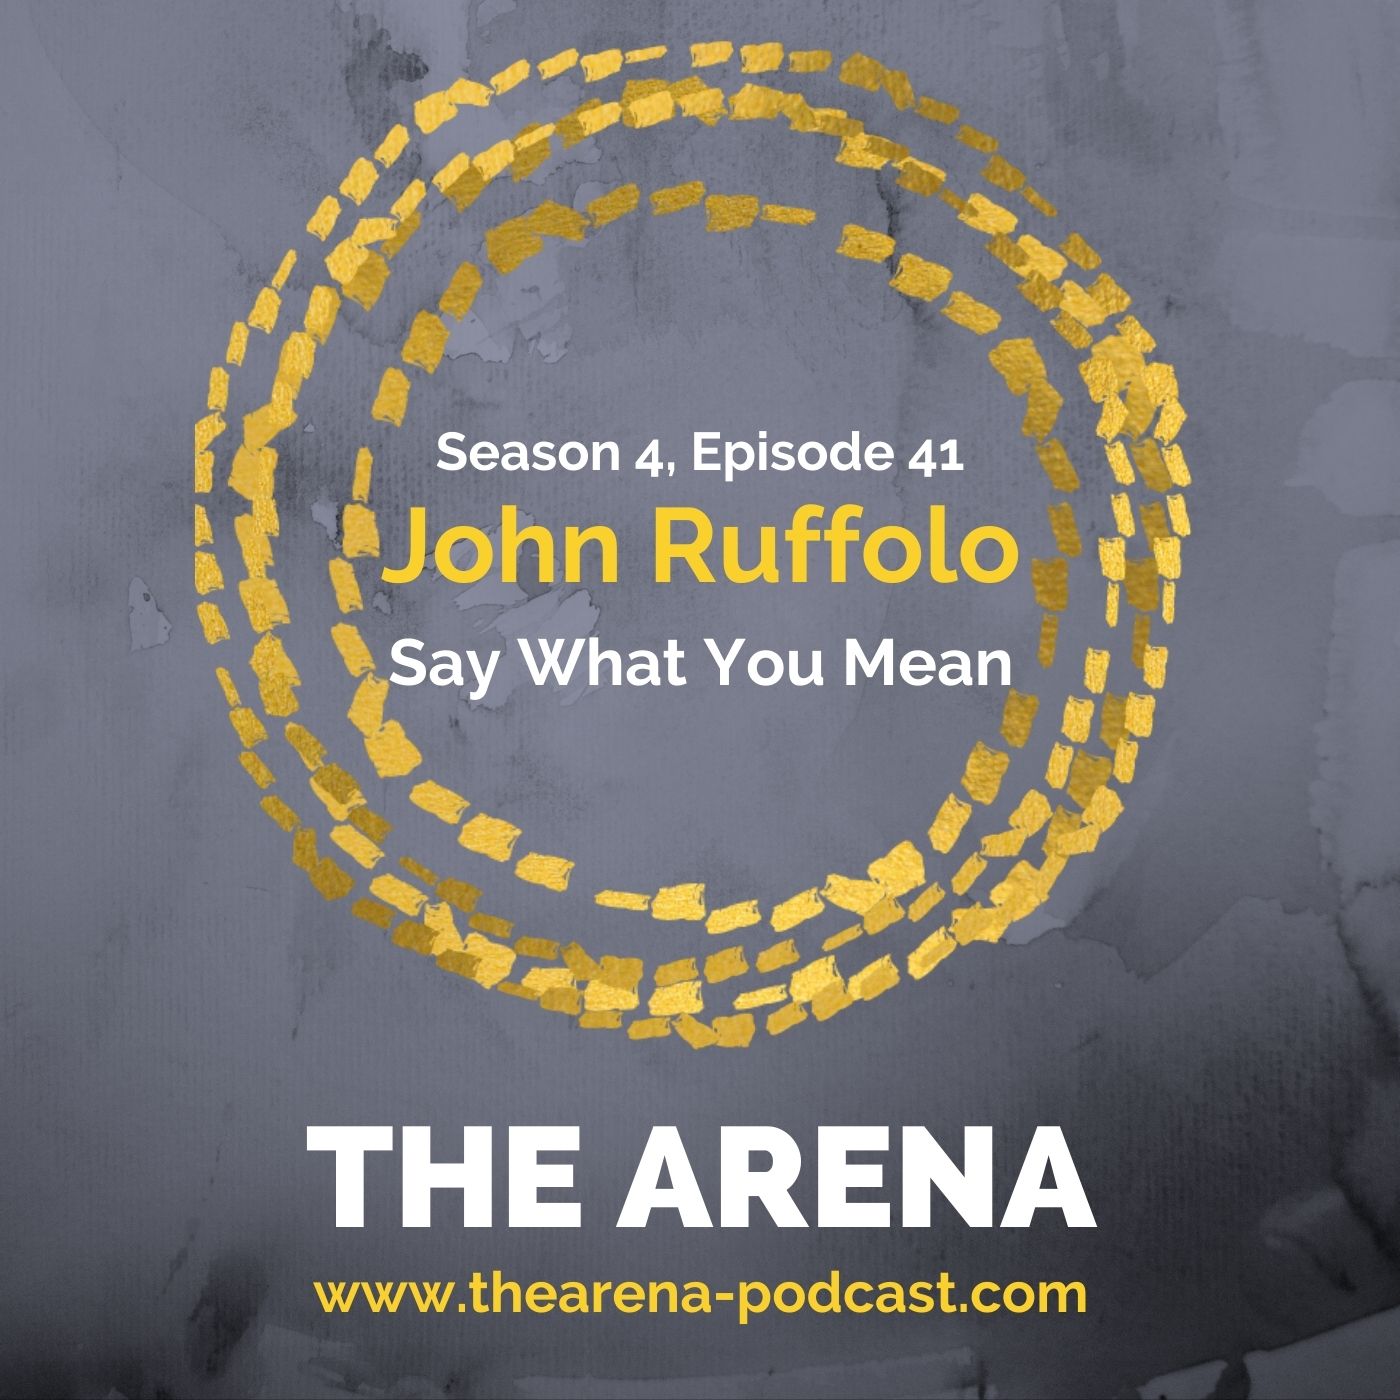 Artwork for podcast THE ARENA - Living a Courageous Life